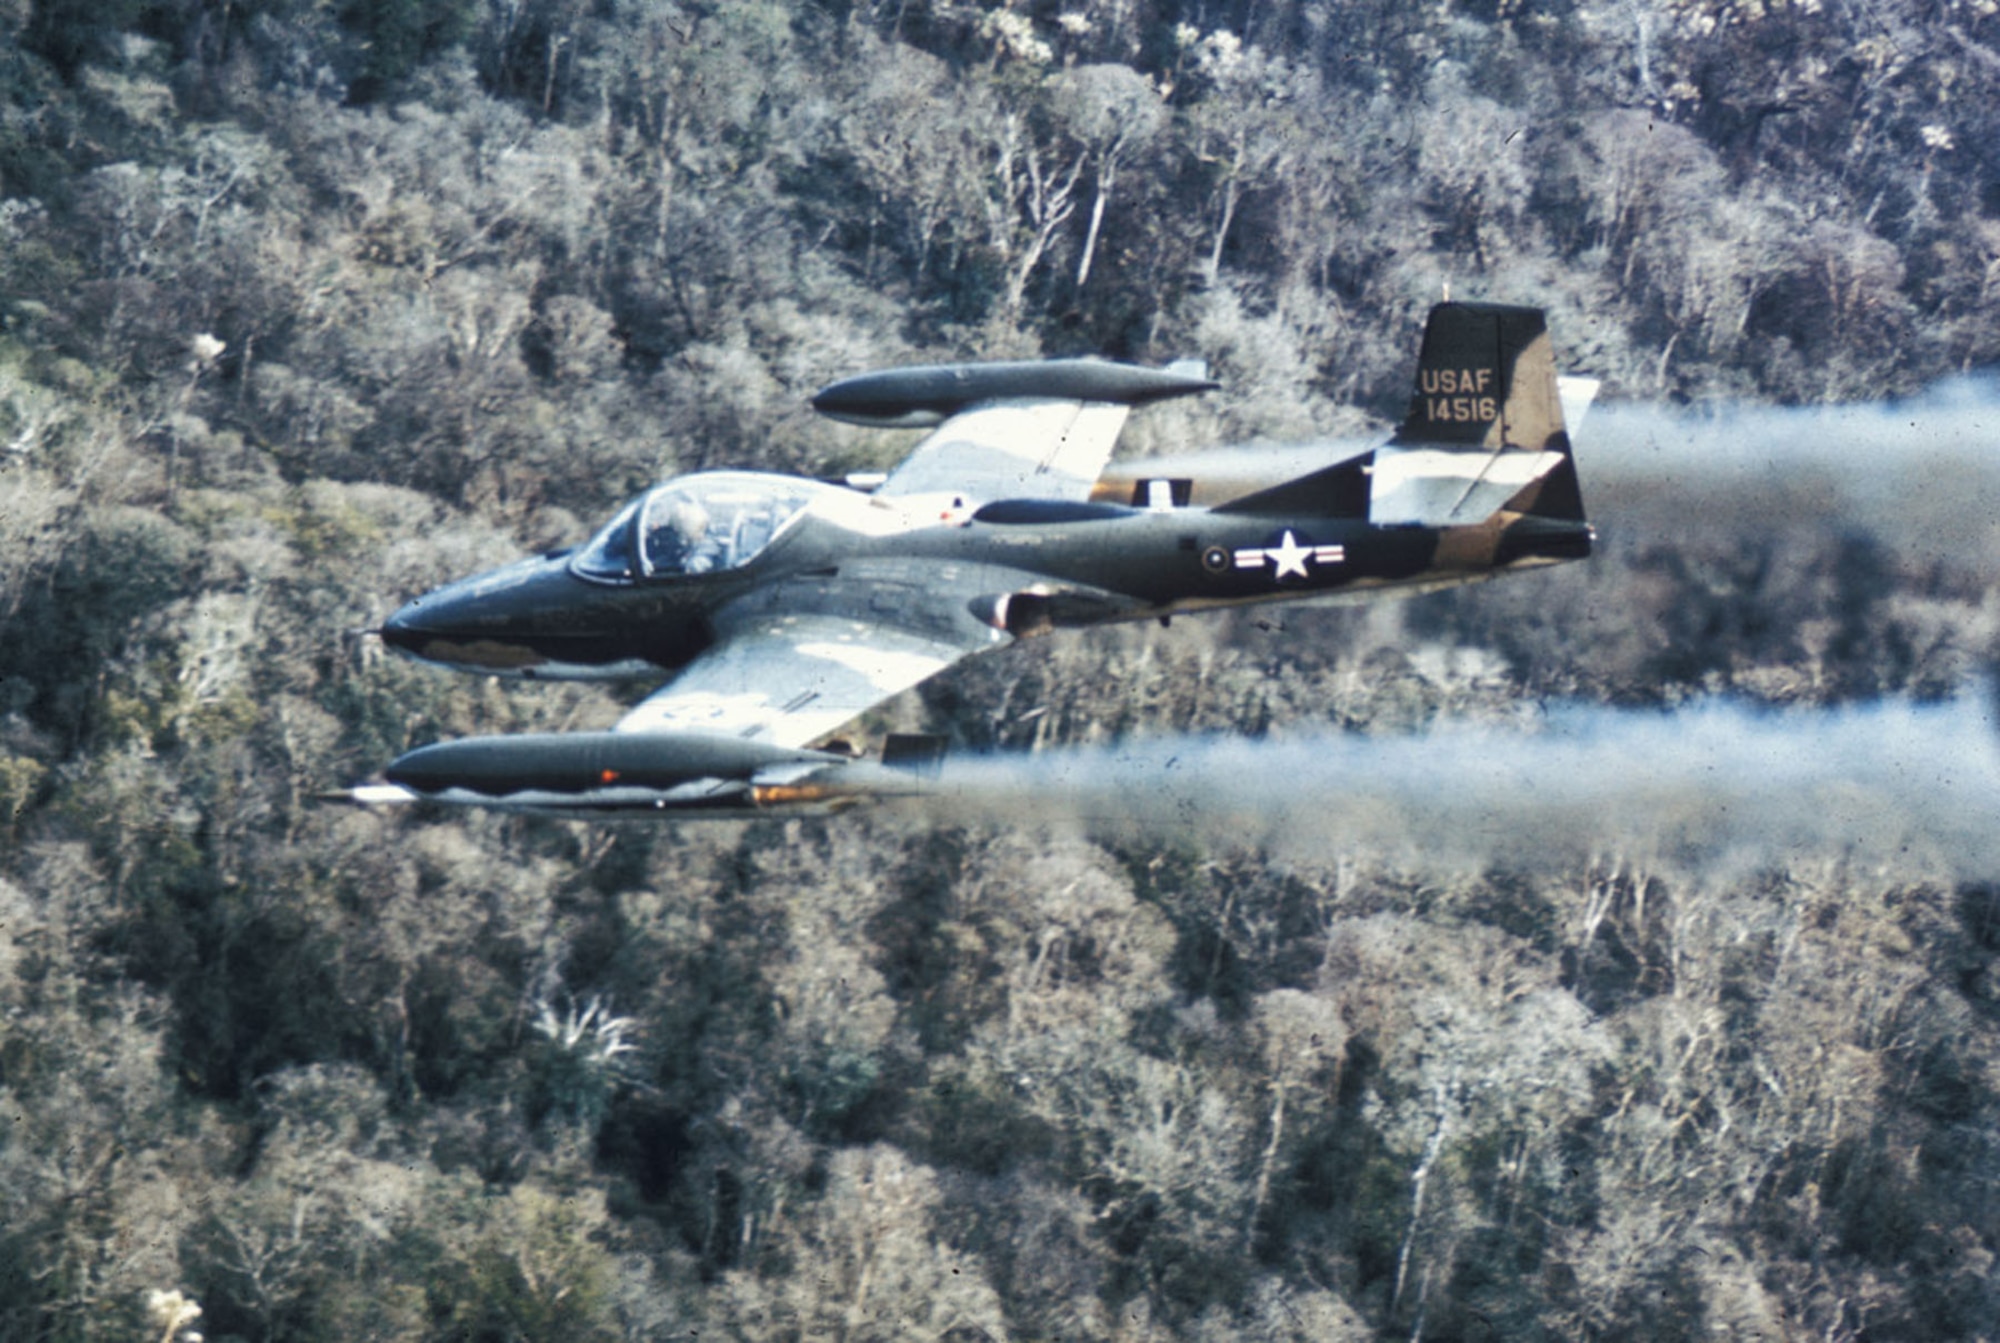 USAF A-37 light attack aircraft provided close air support. (U.S. Air Force photo)